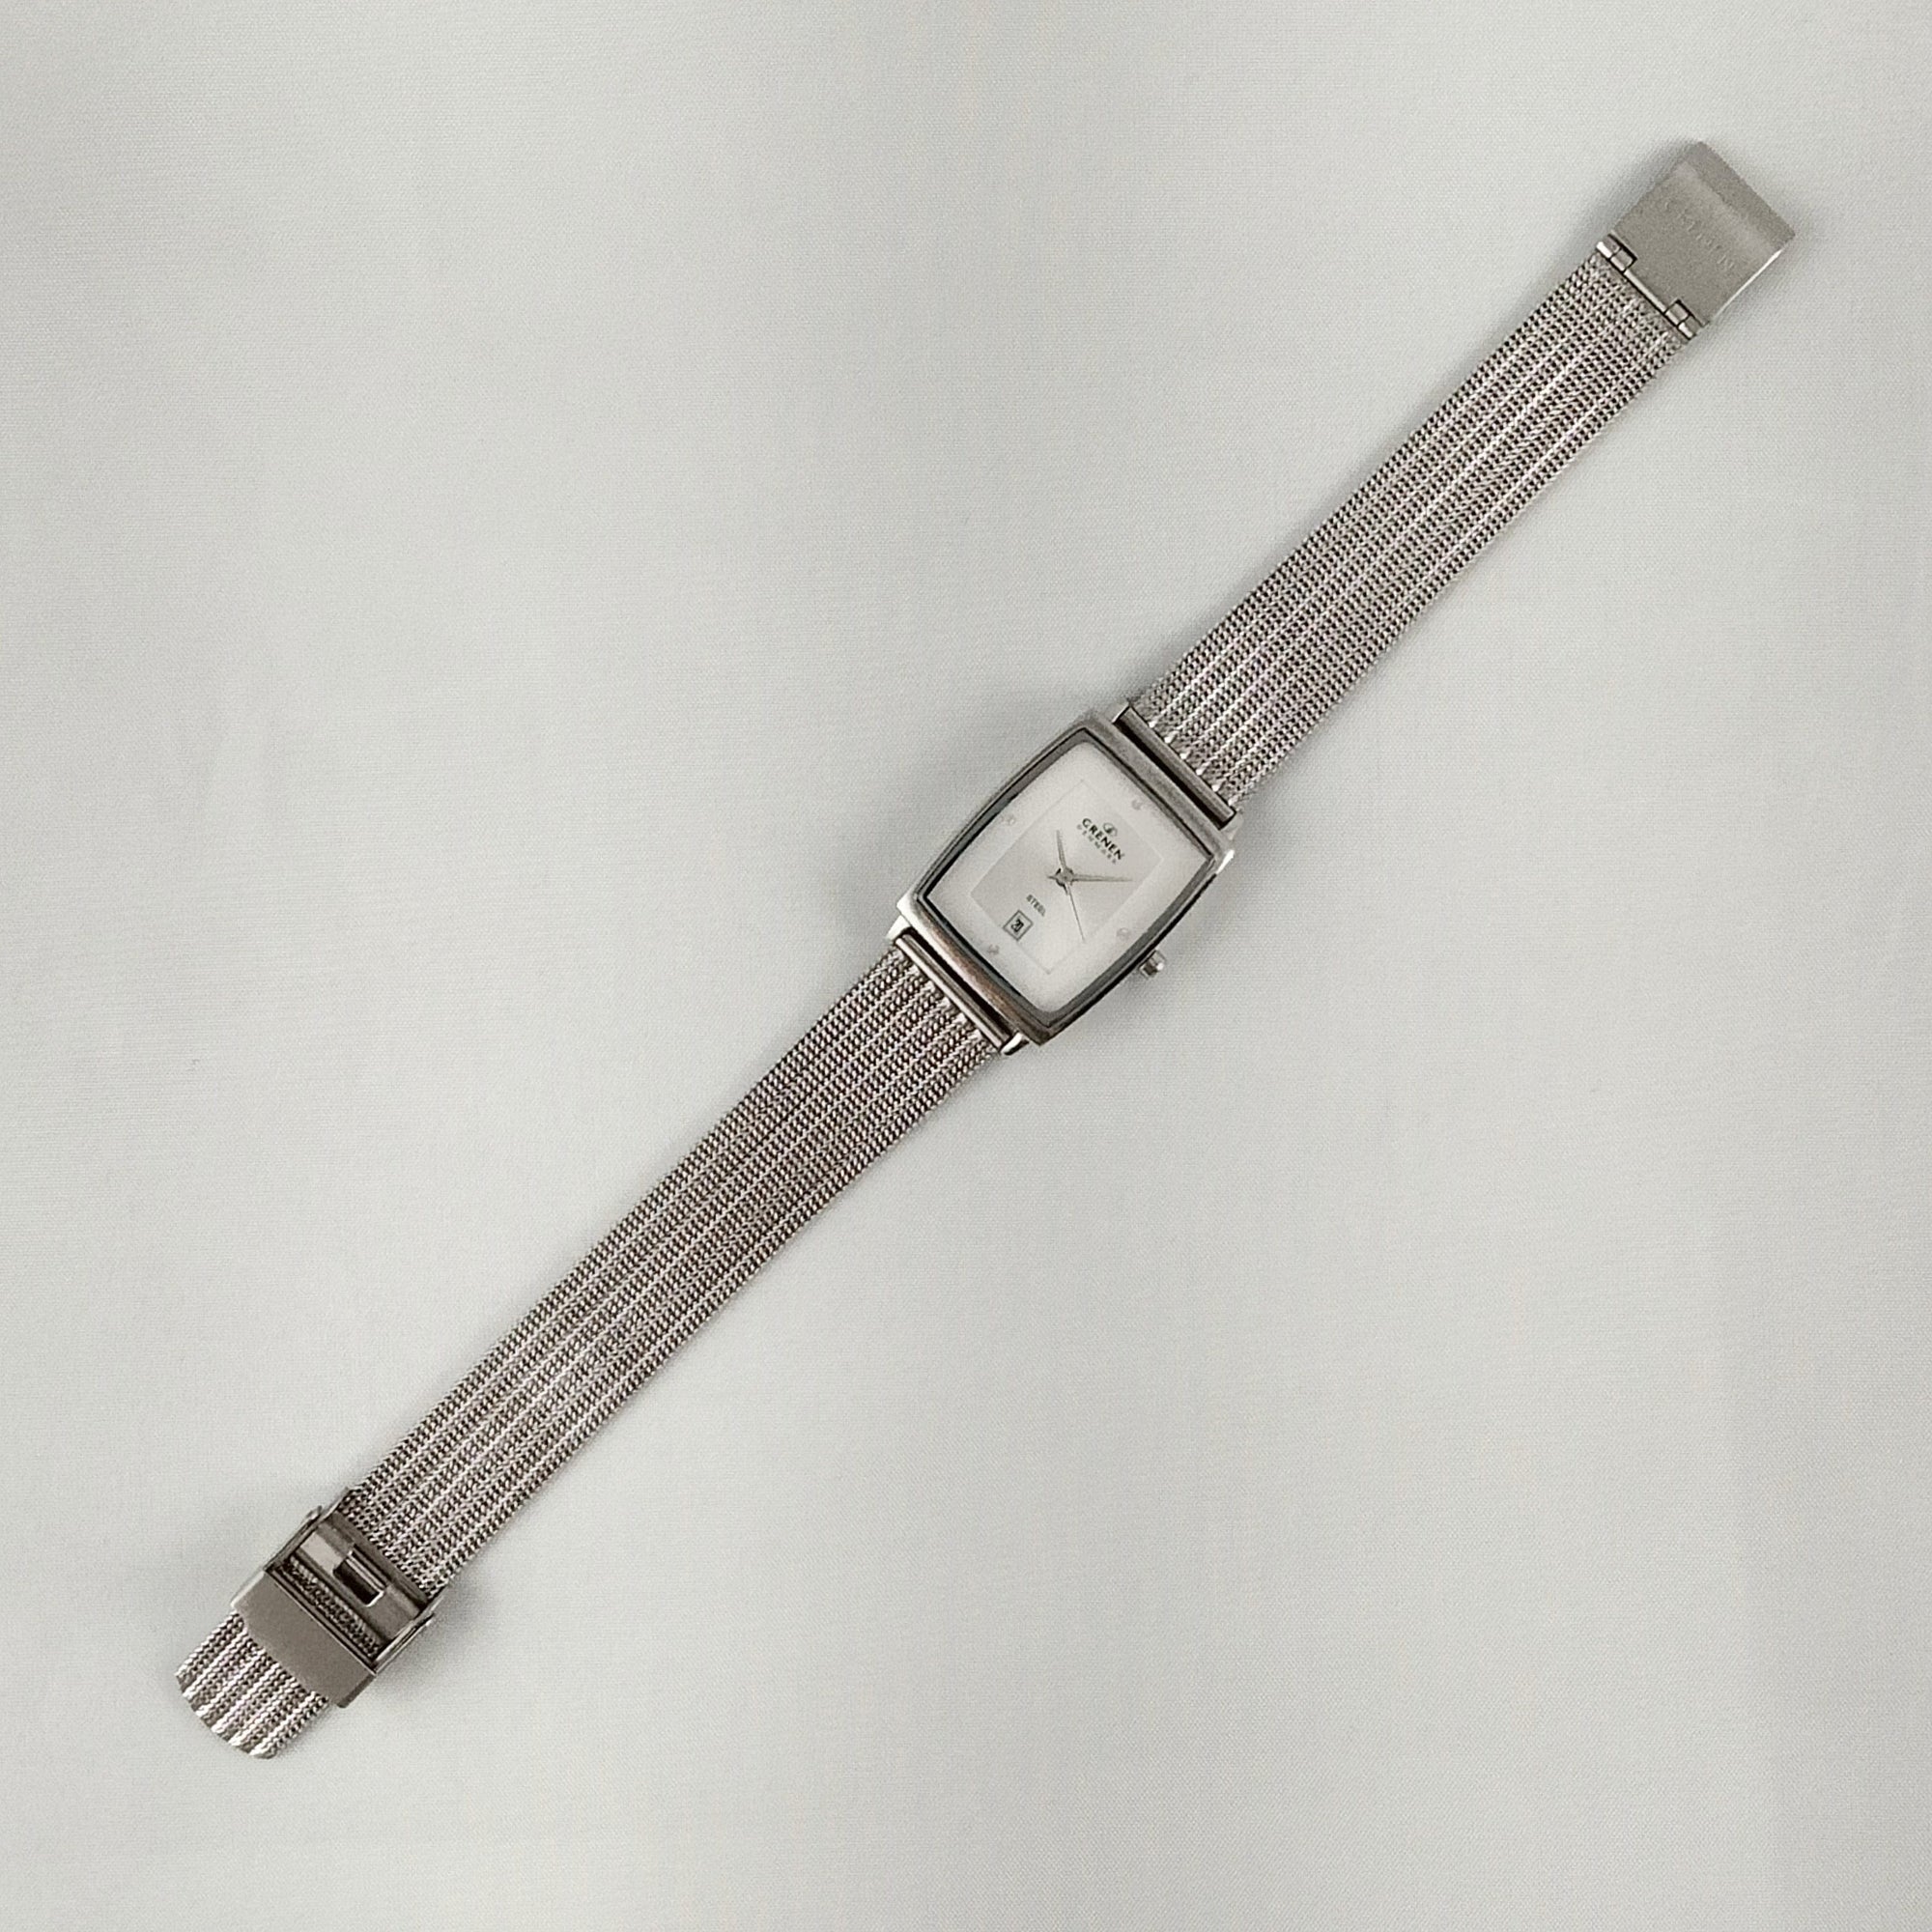 I Like Mikes Mid Century Modern Watches Grenen Women's Stainless Steel Watch, Rectangular Dial, Jewel Hour Markers, Mesh Strap